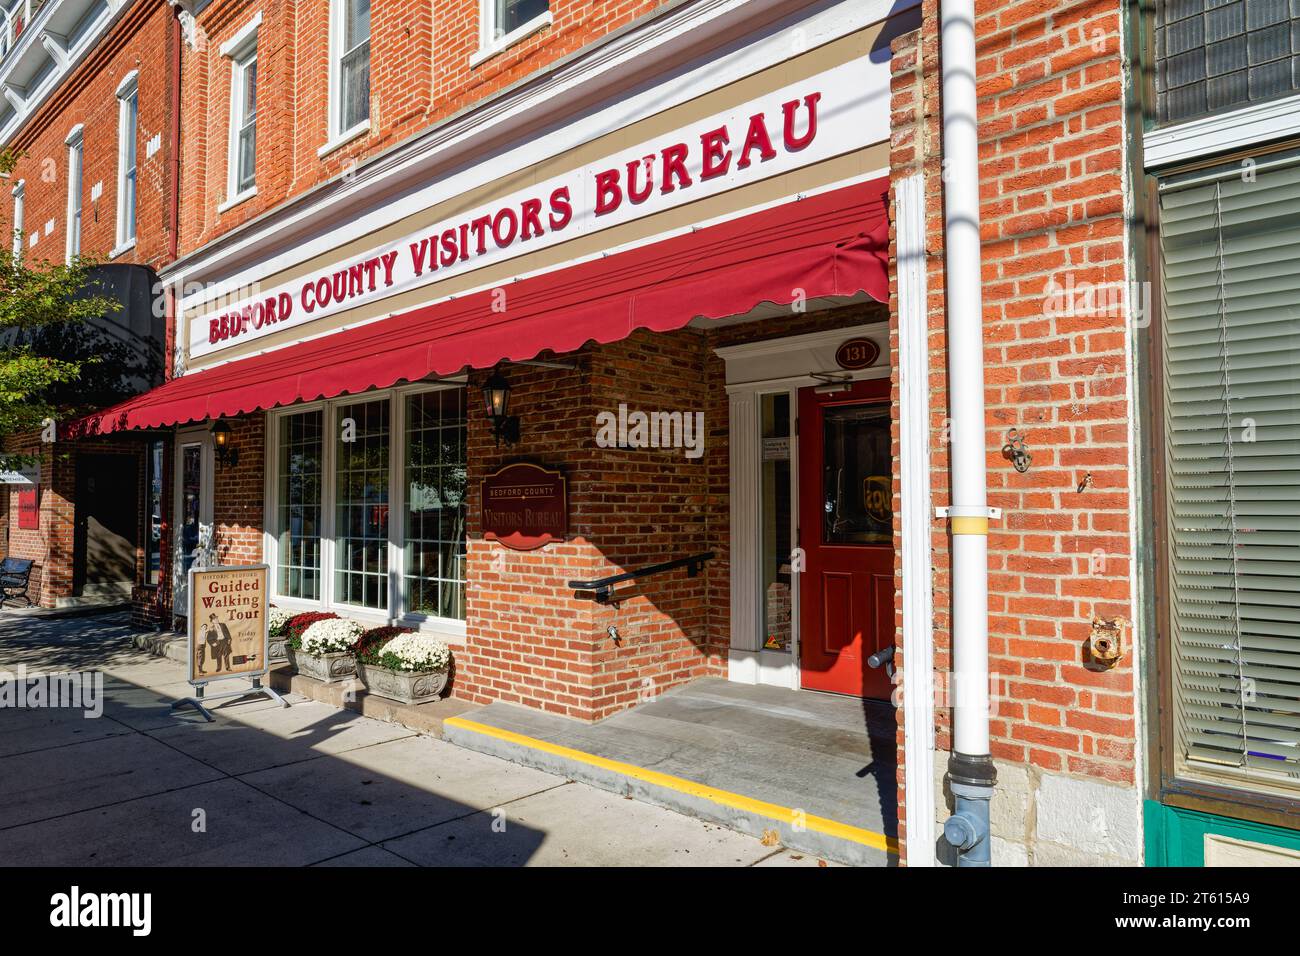 Bedford, PA - Sept. 27, 2023: The Bedford County Visitors Bureau offers a free Guided Walking Tour of historic Bedford on Friday at 3:30 from June thr Stock Photo